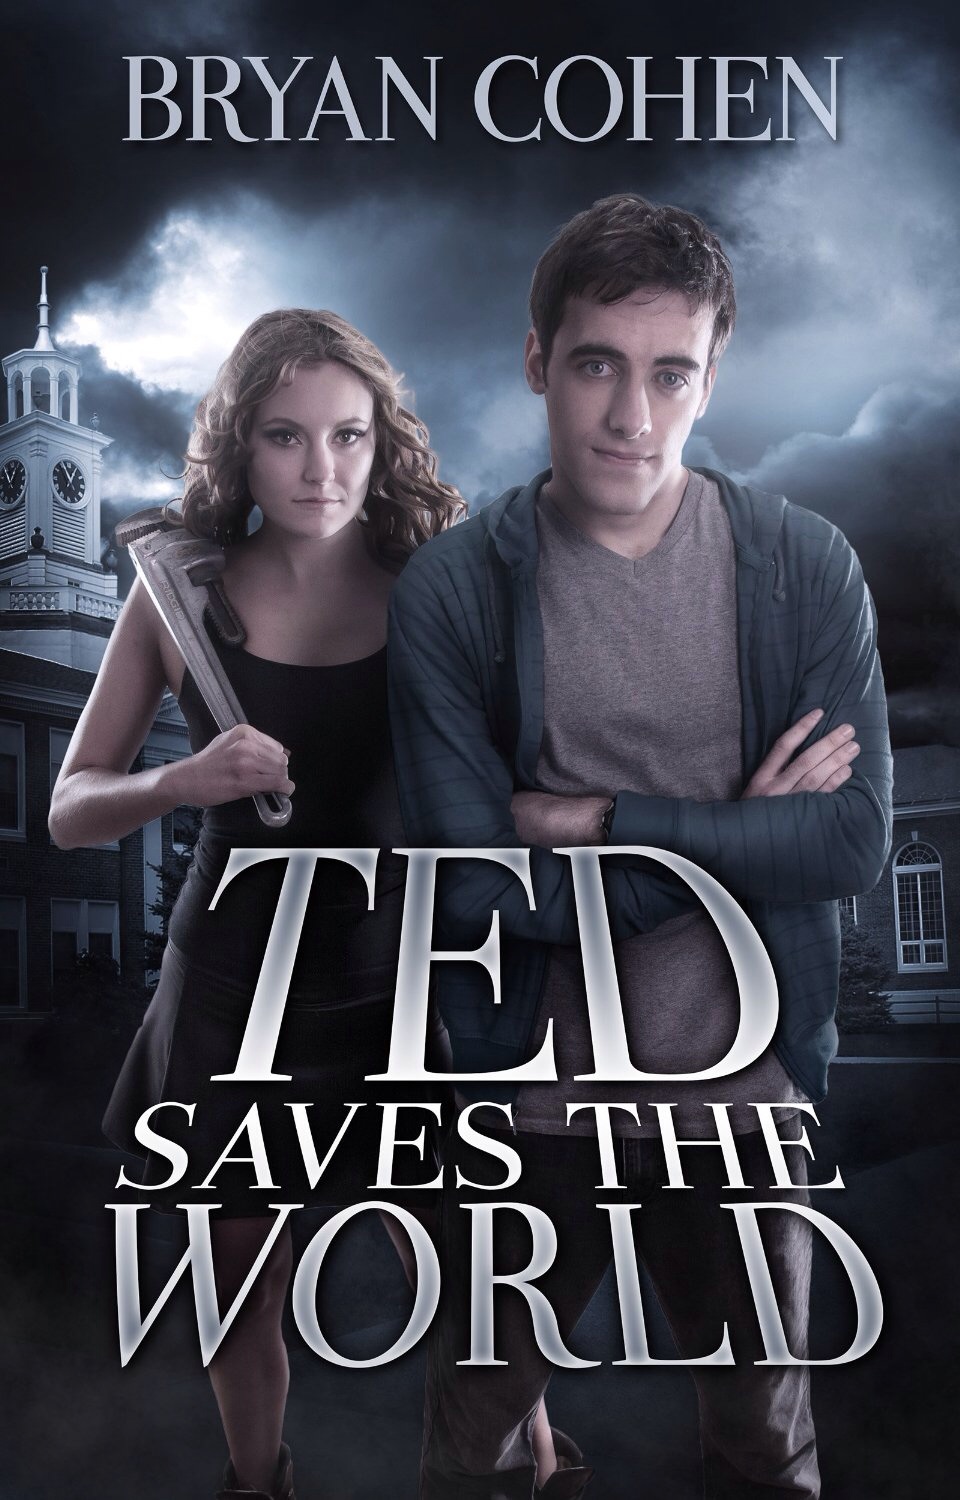 FREE: Ted Saves the World by Bryan Cohen